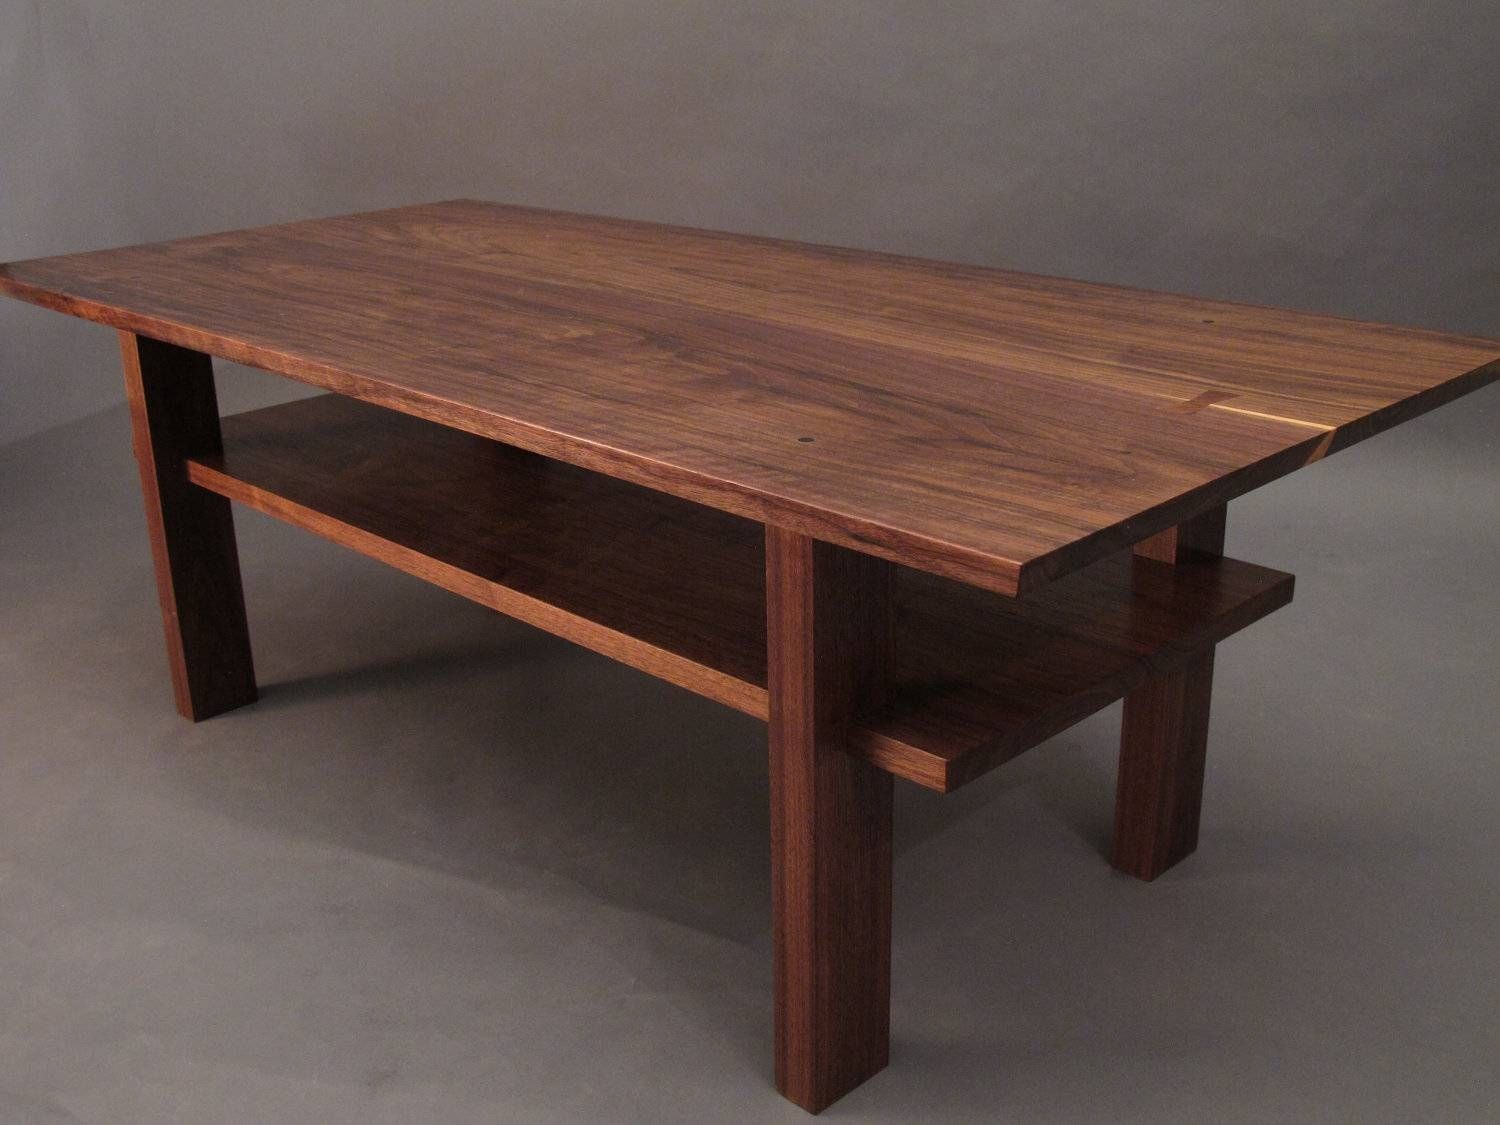 Walnut Coffee Table Small Wood Tables For Living Room Narrow Pertaining To Small Coffee Tables (View 25 of 30)